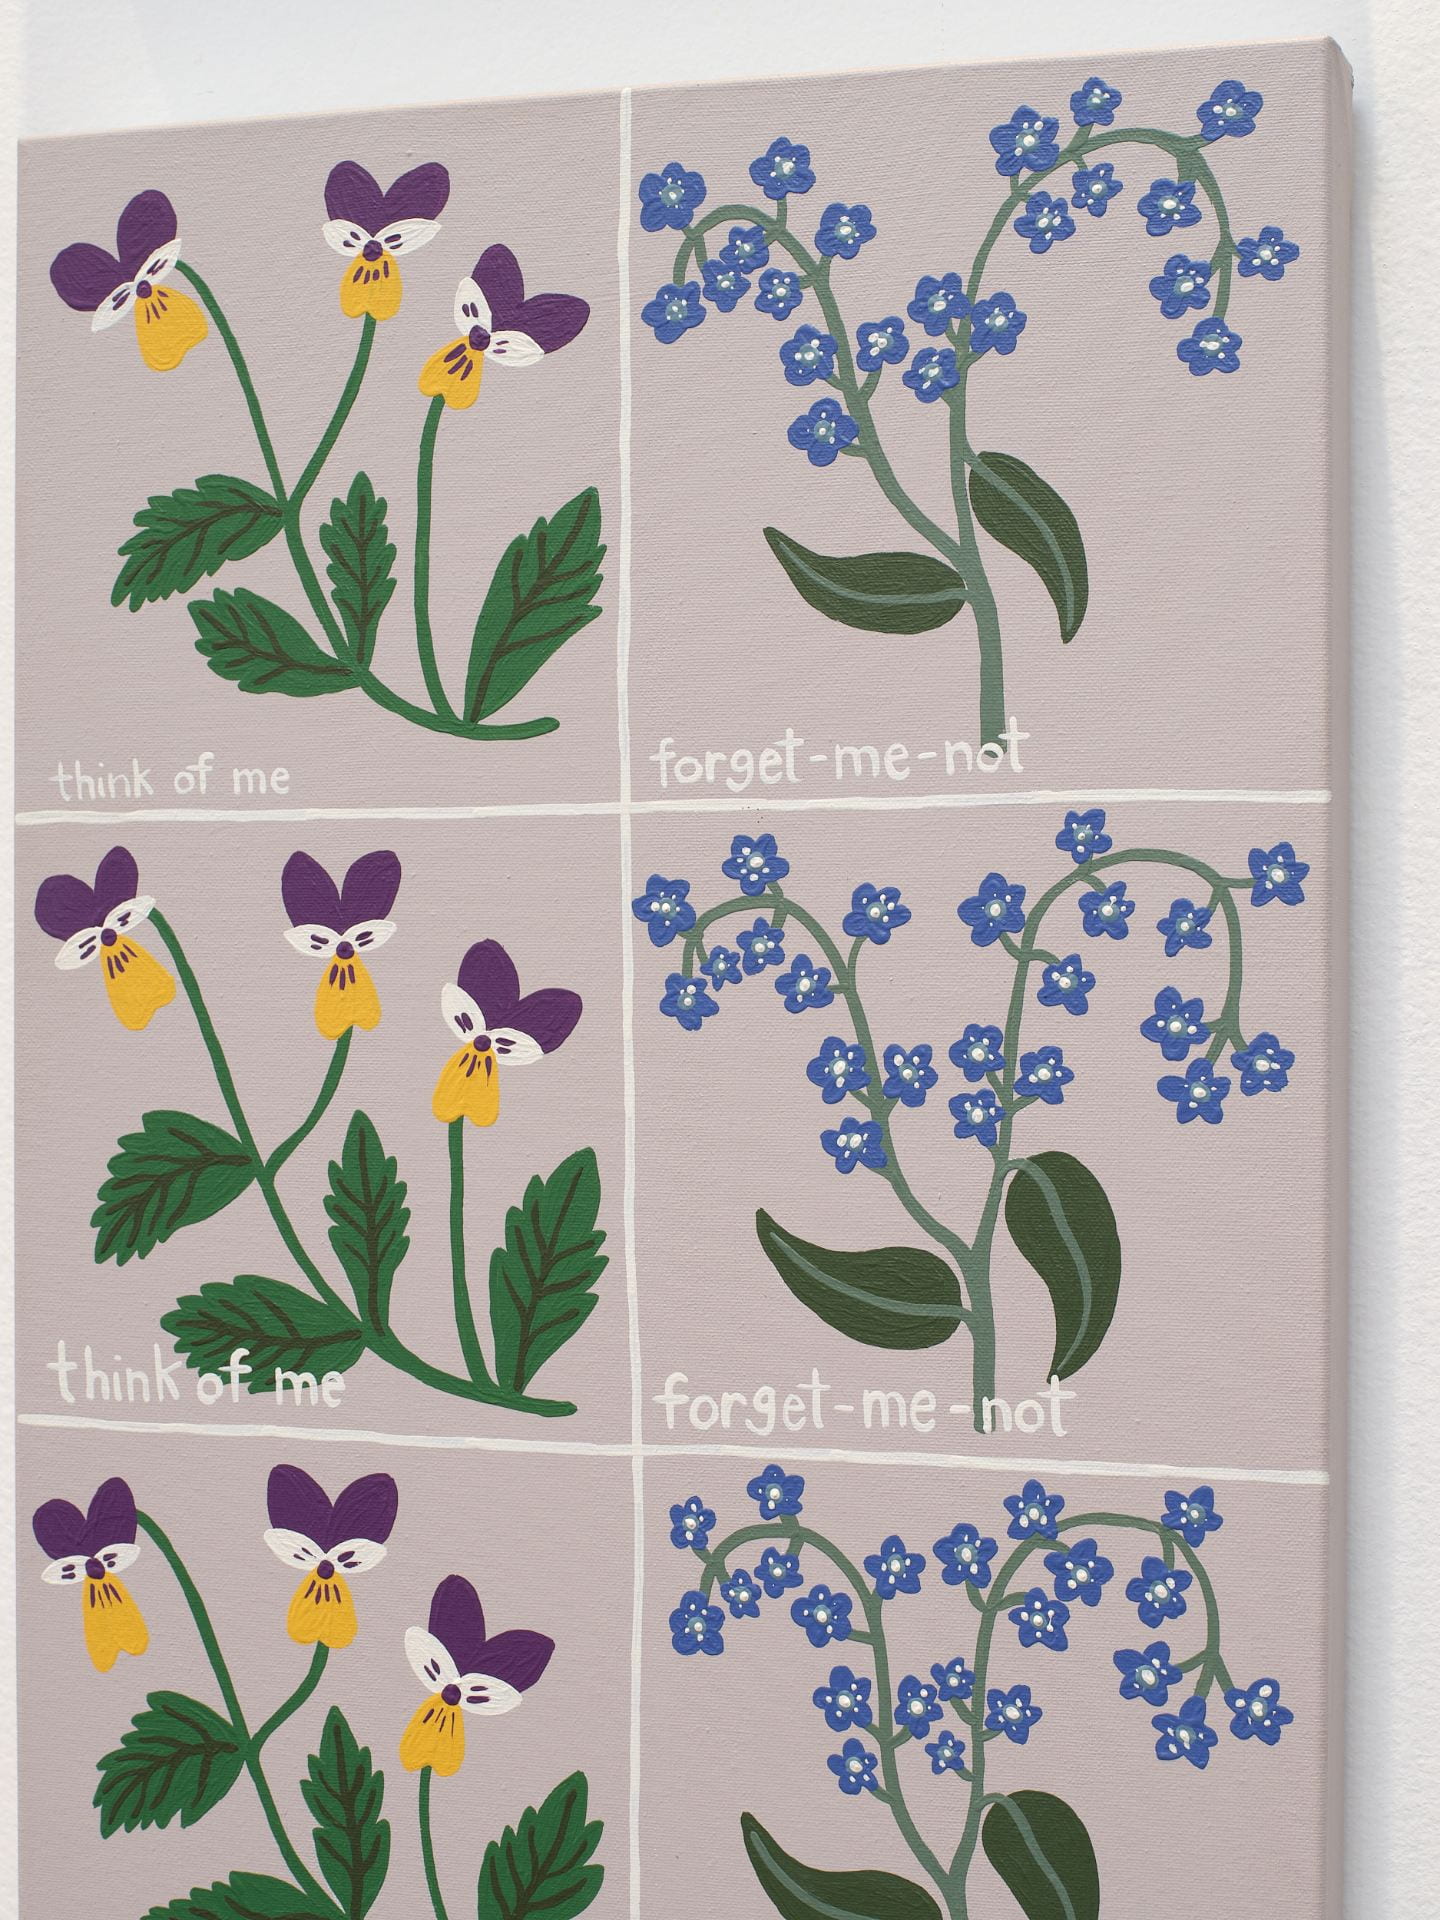 Close-up of a painting. Pansies captioned 'think of me' and forget-me-nots captioned 'forget-me-not' are arranged in a repetitive grid.